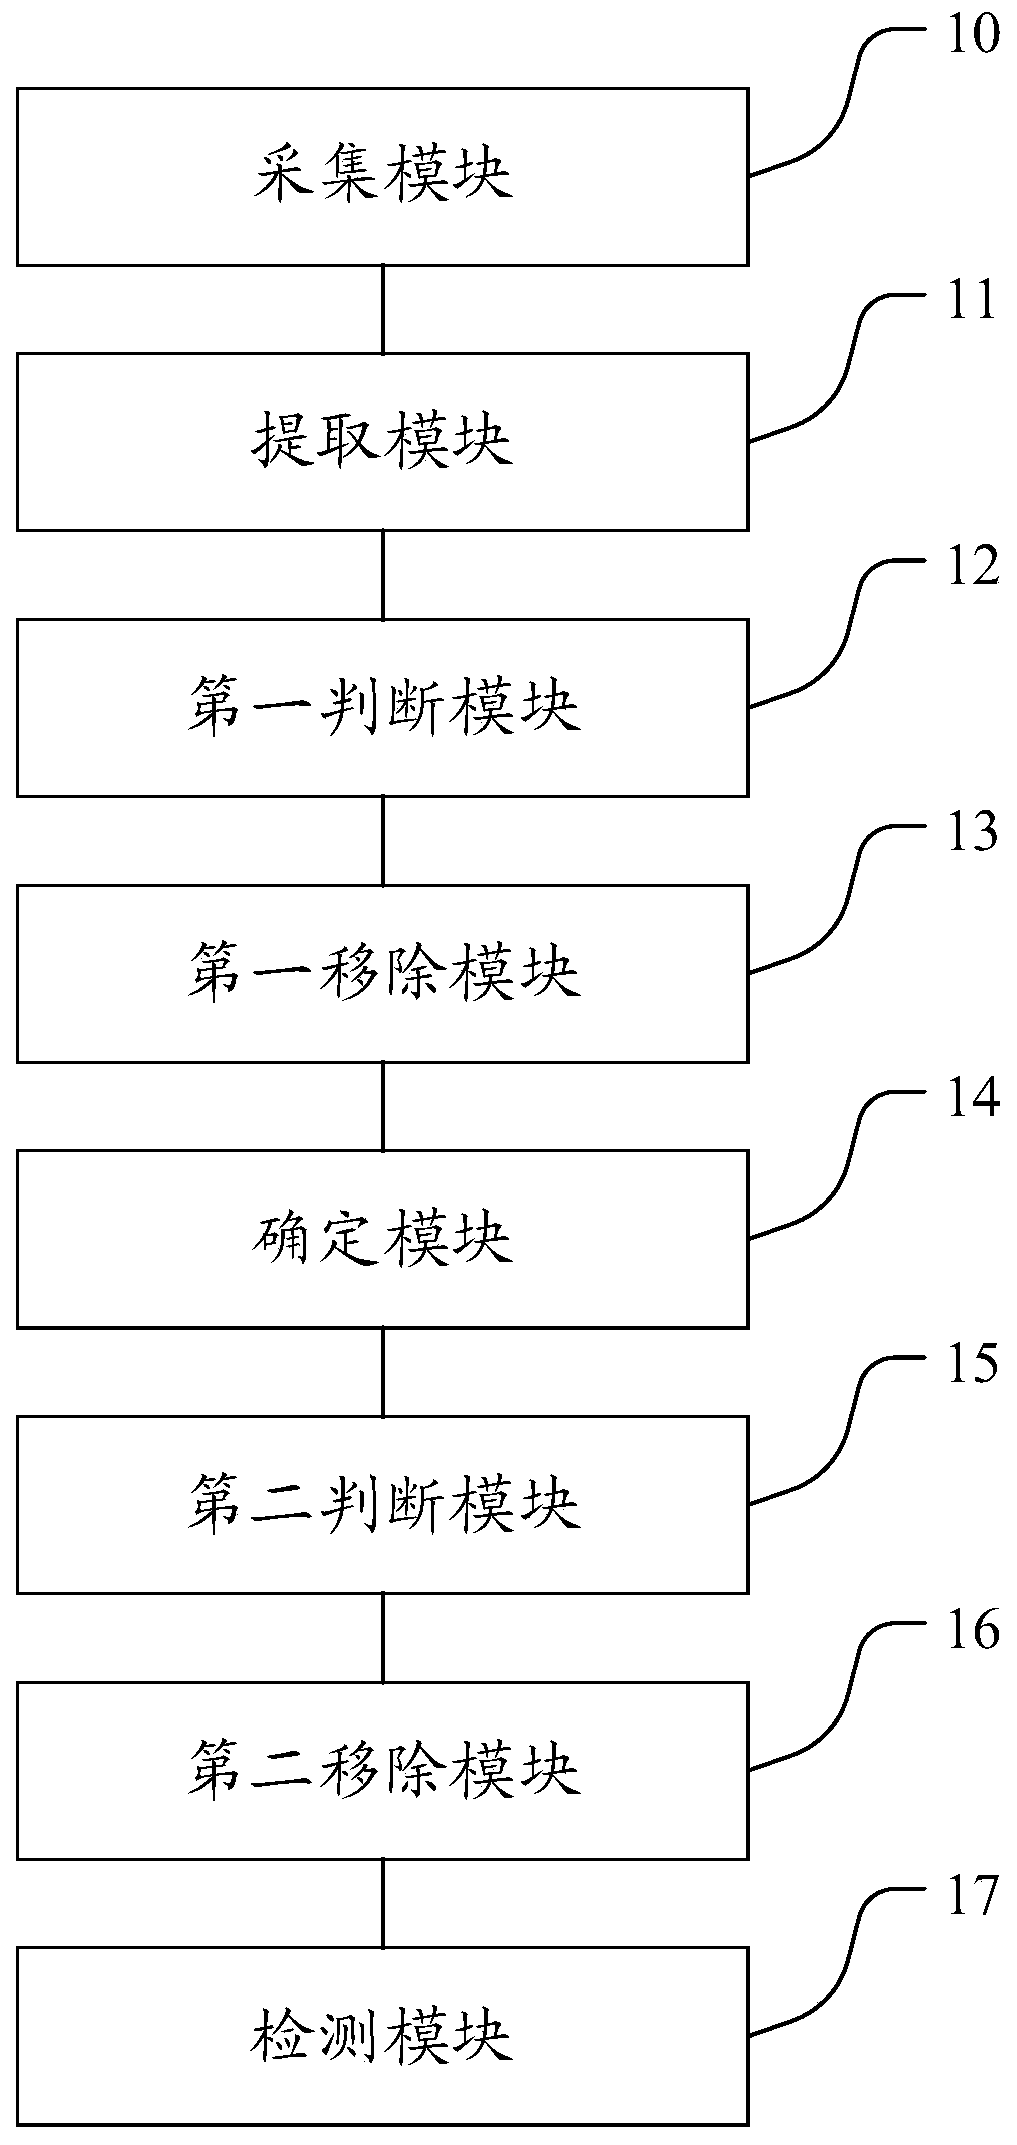 Network intrusion data detection method and device, equipment and medium